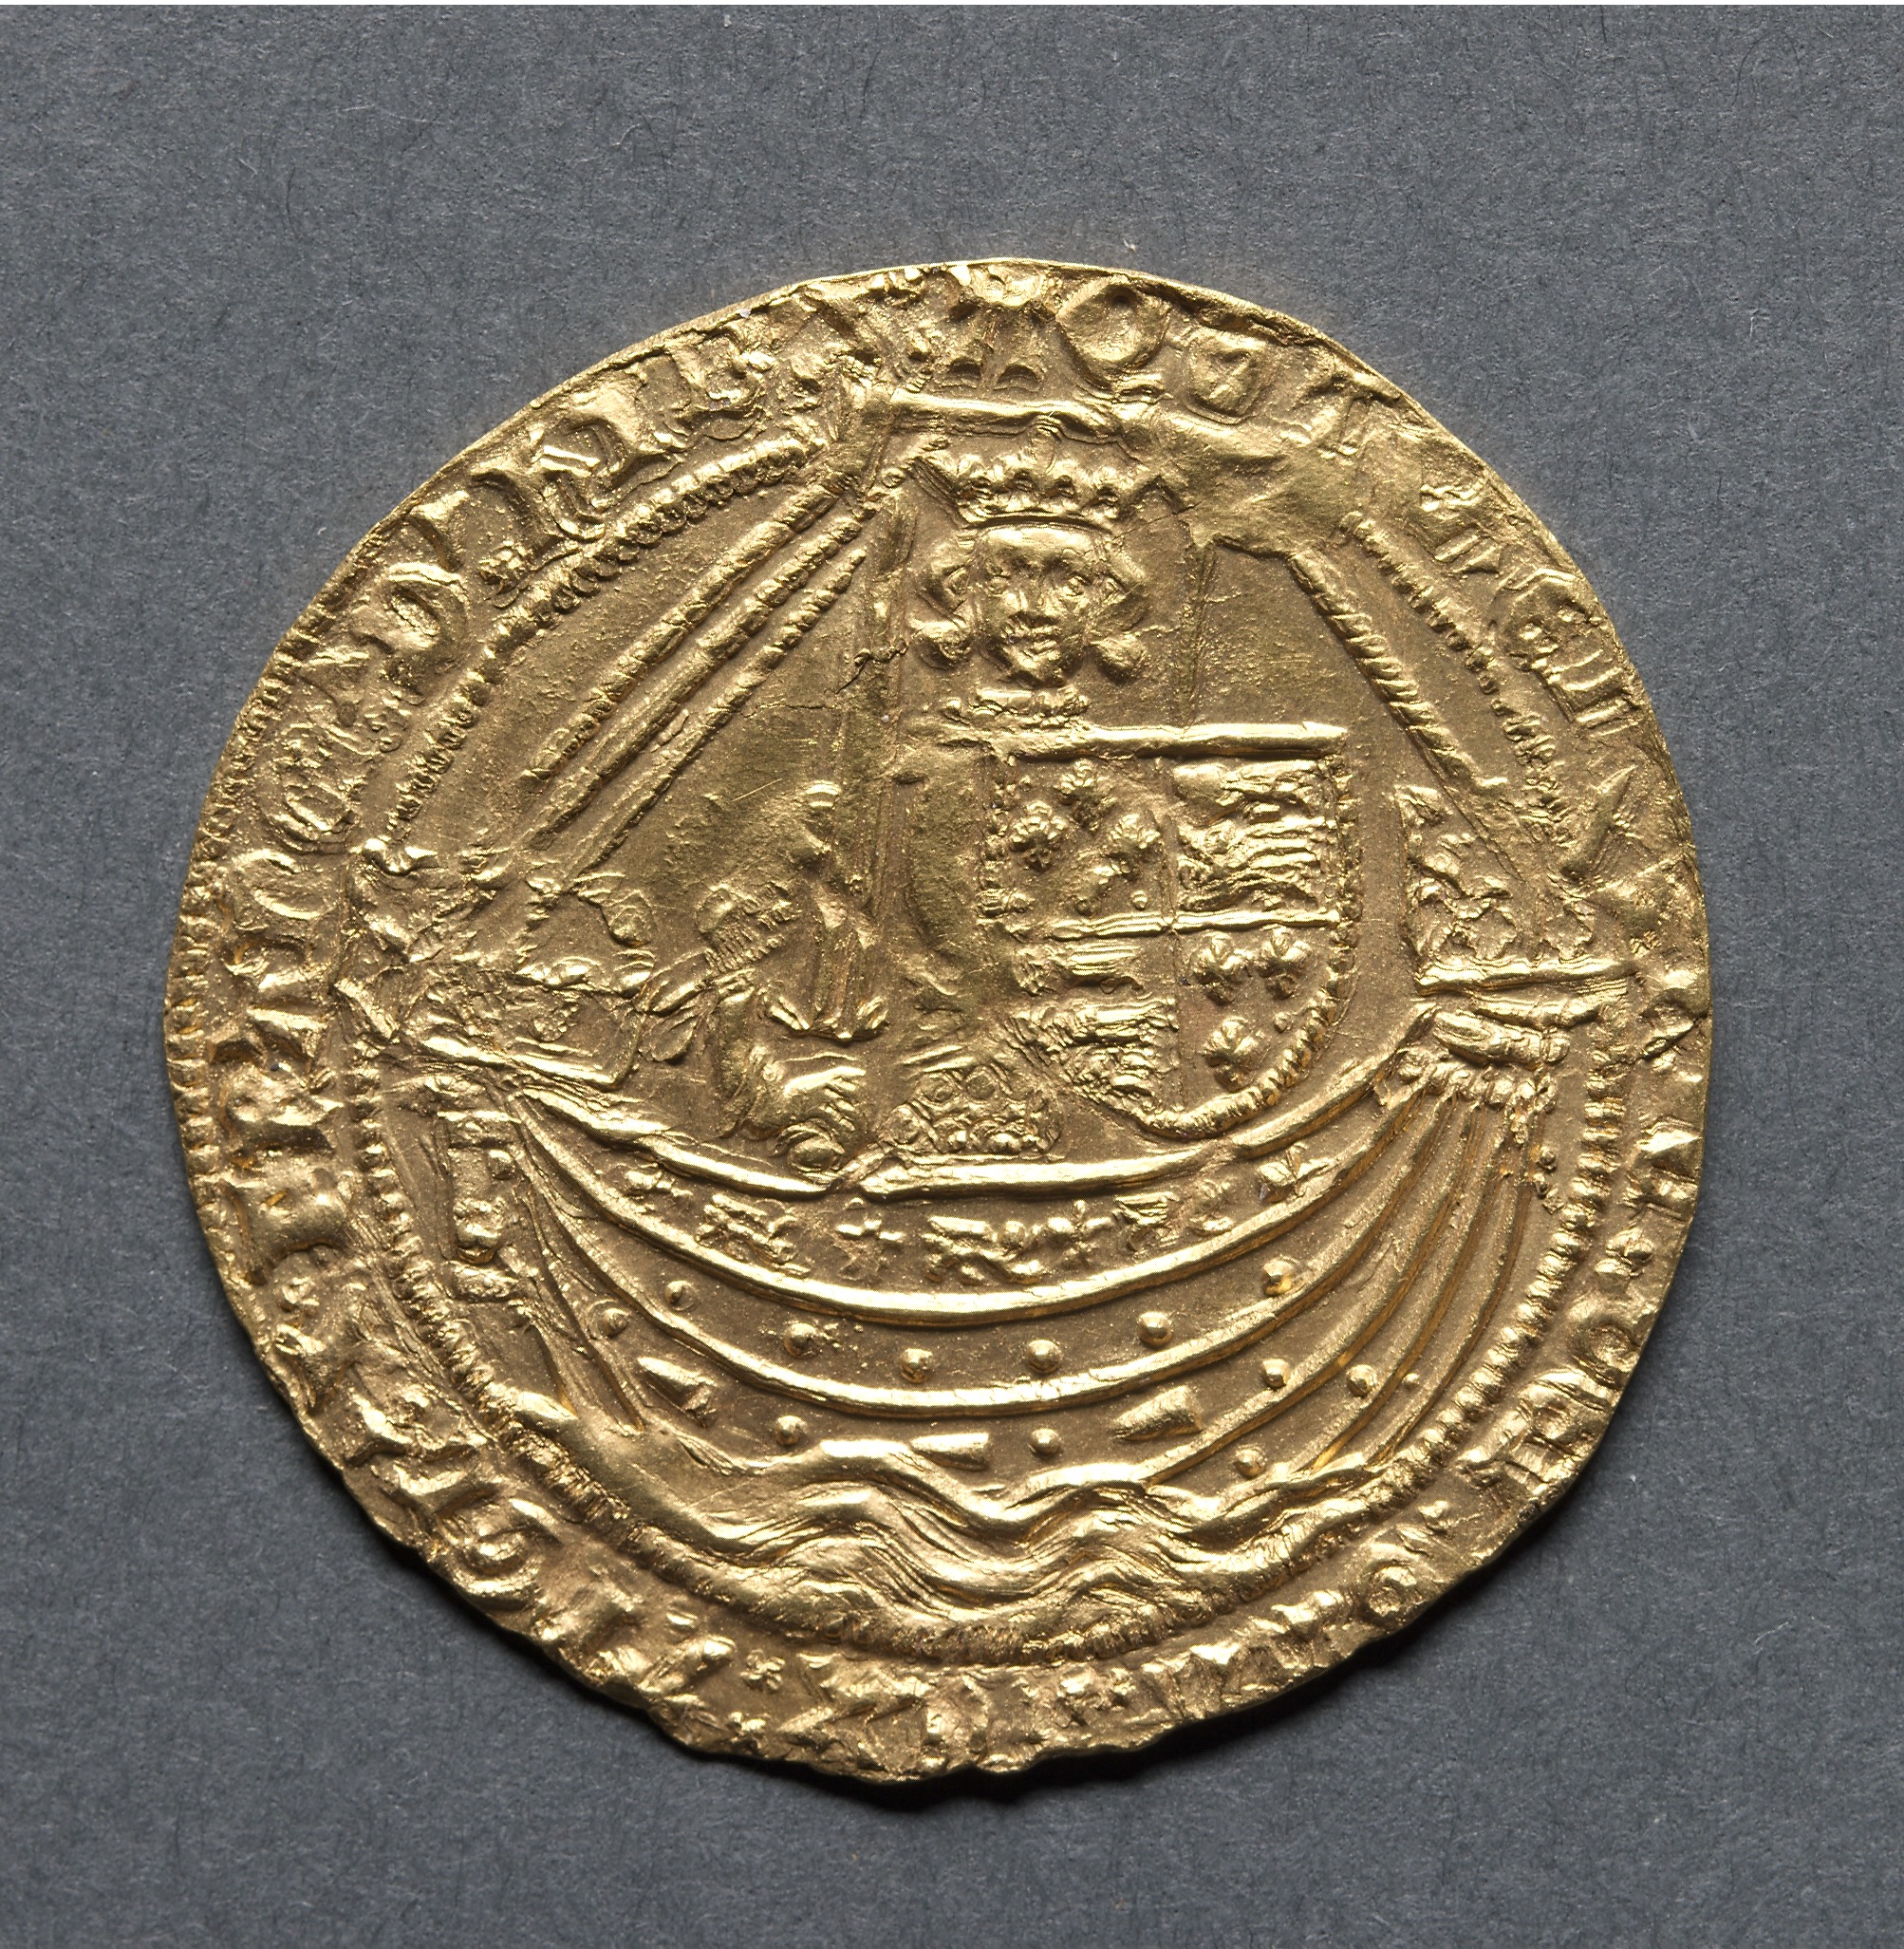 Noble: Henry V in Ship with Shield of Arms (obverse)